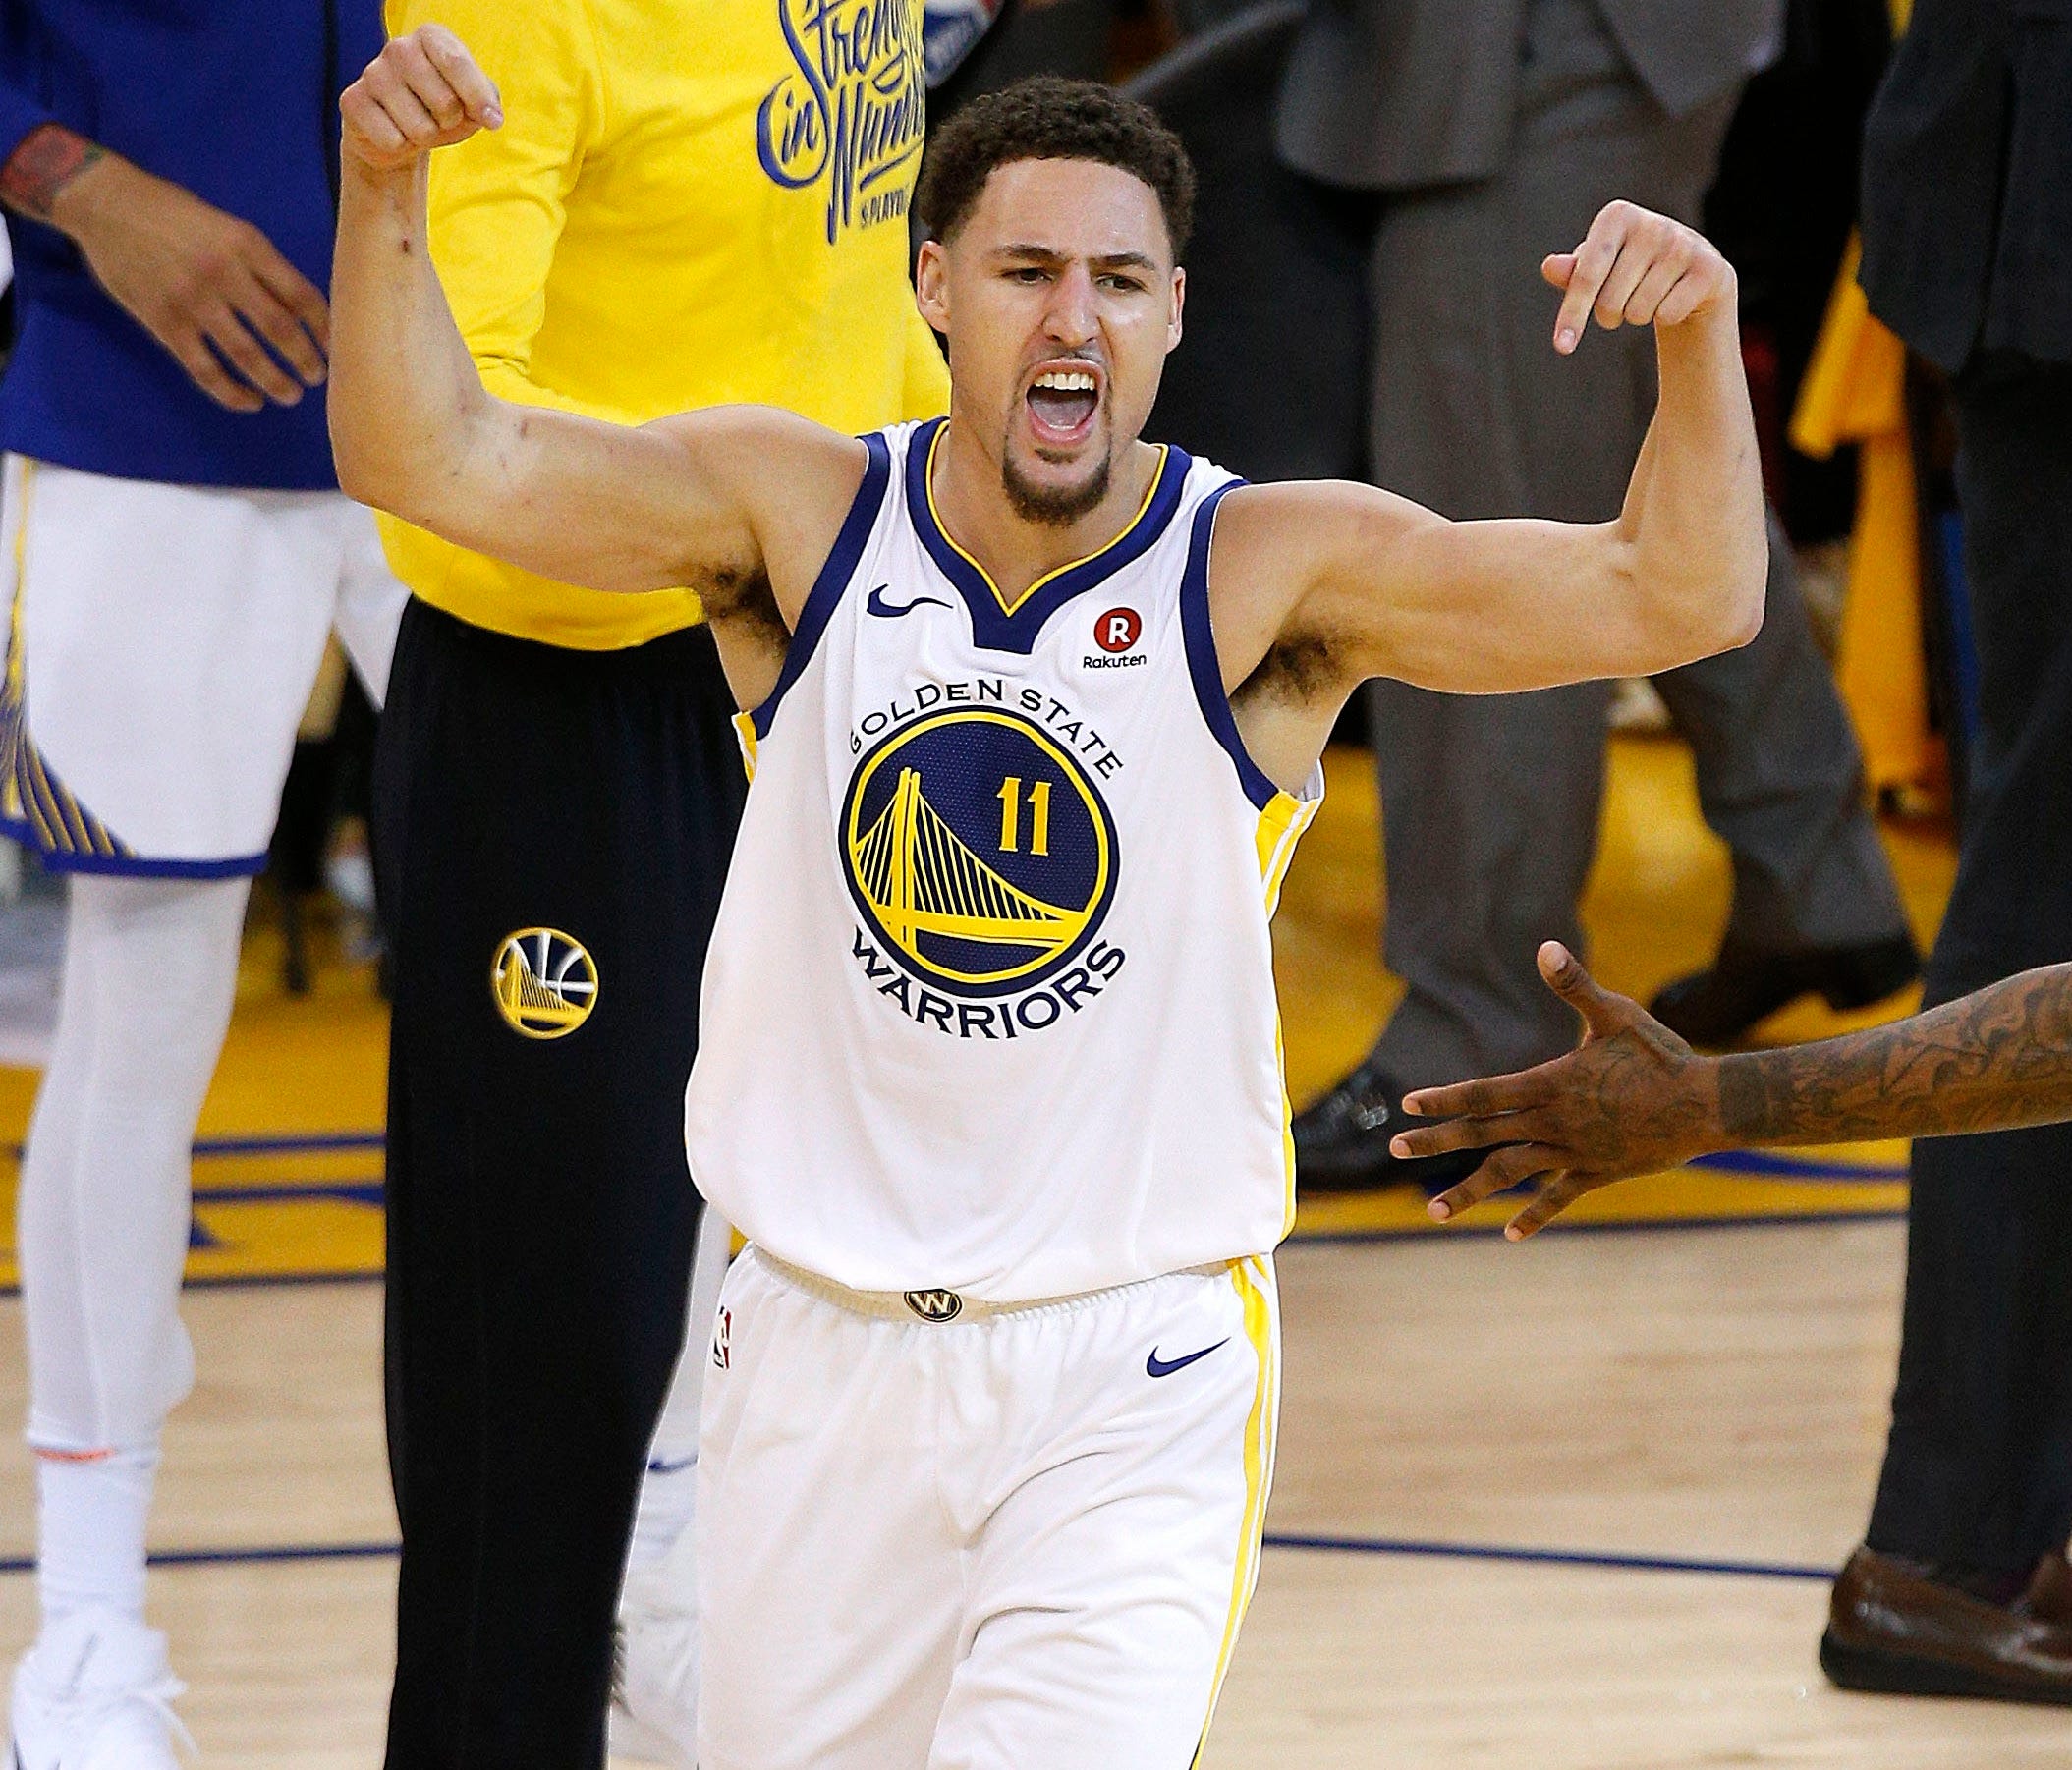 Klay Thompson scored a game-high 35 points for the Warriors.